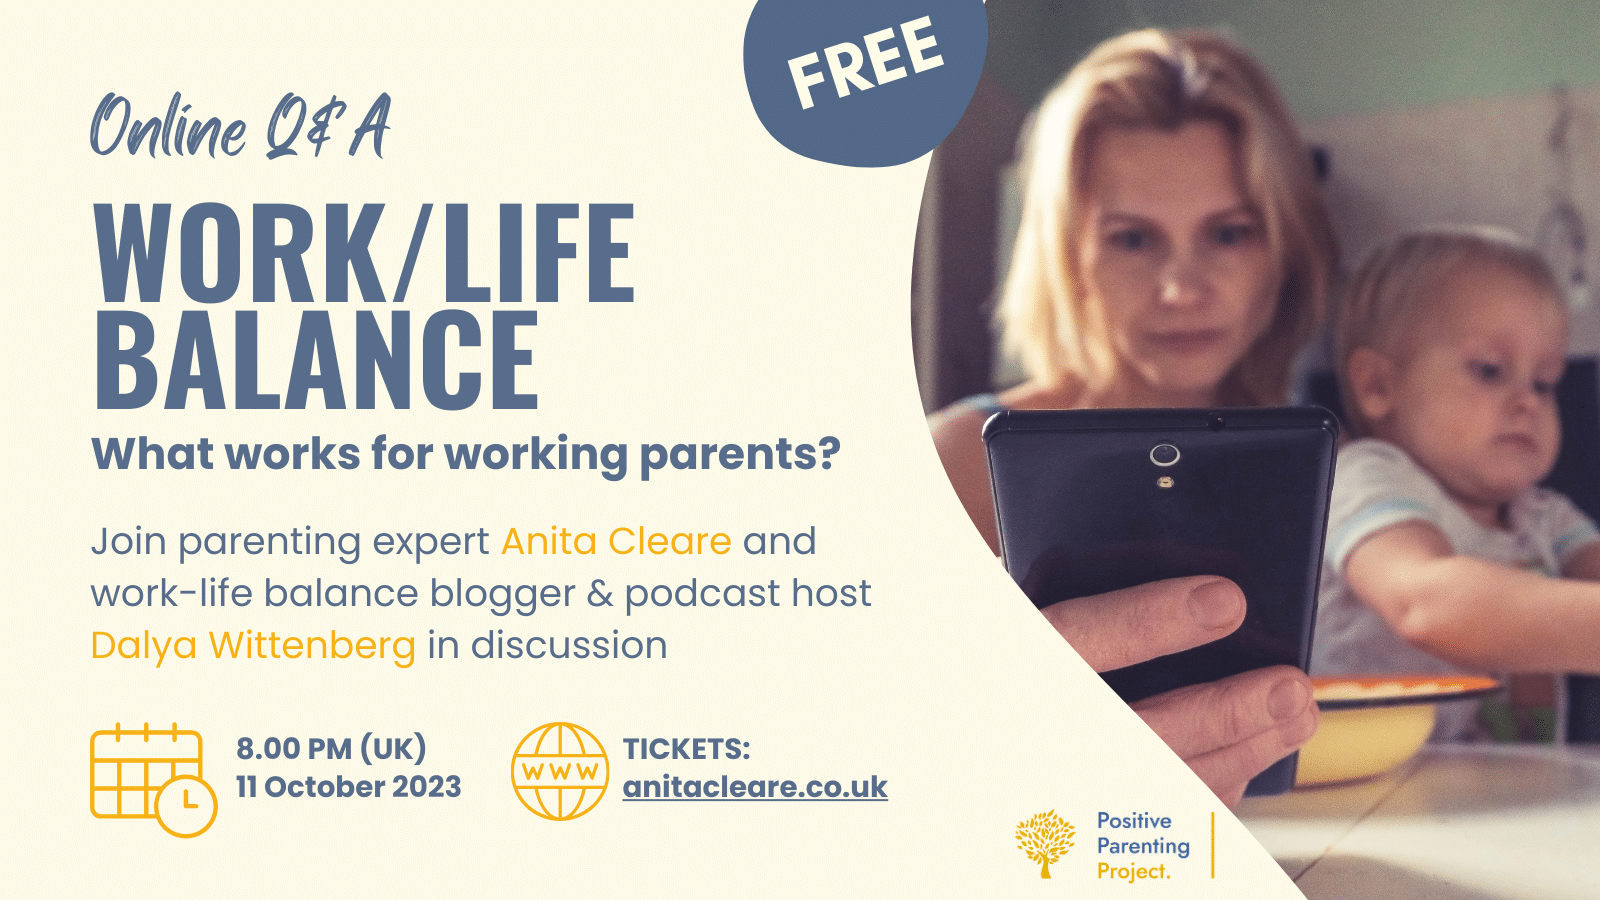 Flier for Work-Life Balance event with Dalya Wittenberg and Anita Cleare